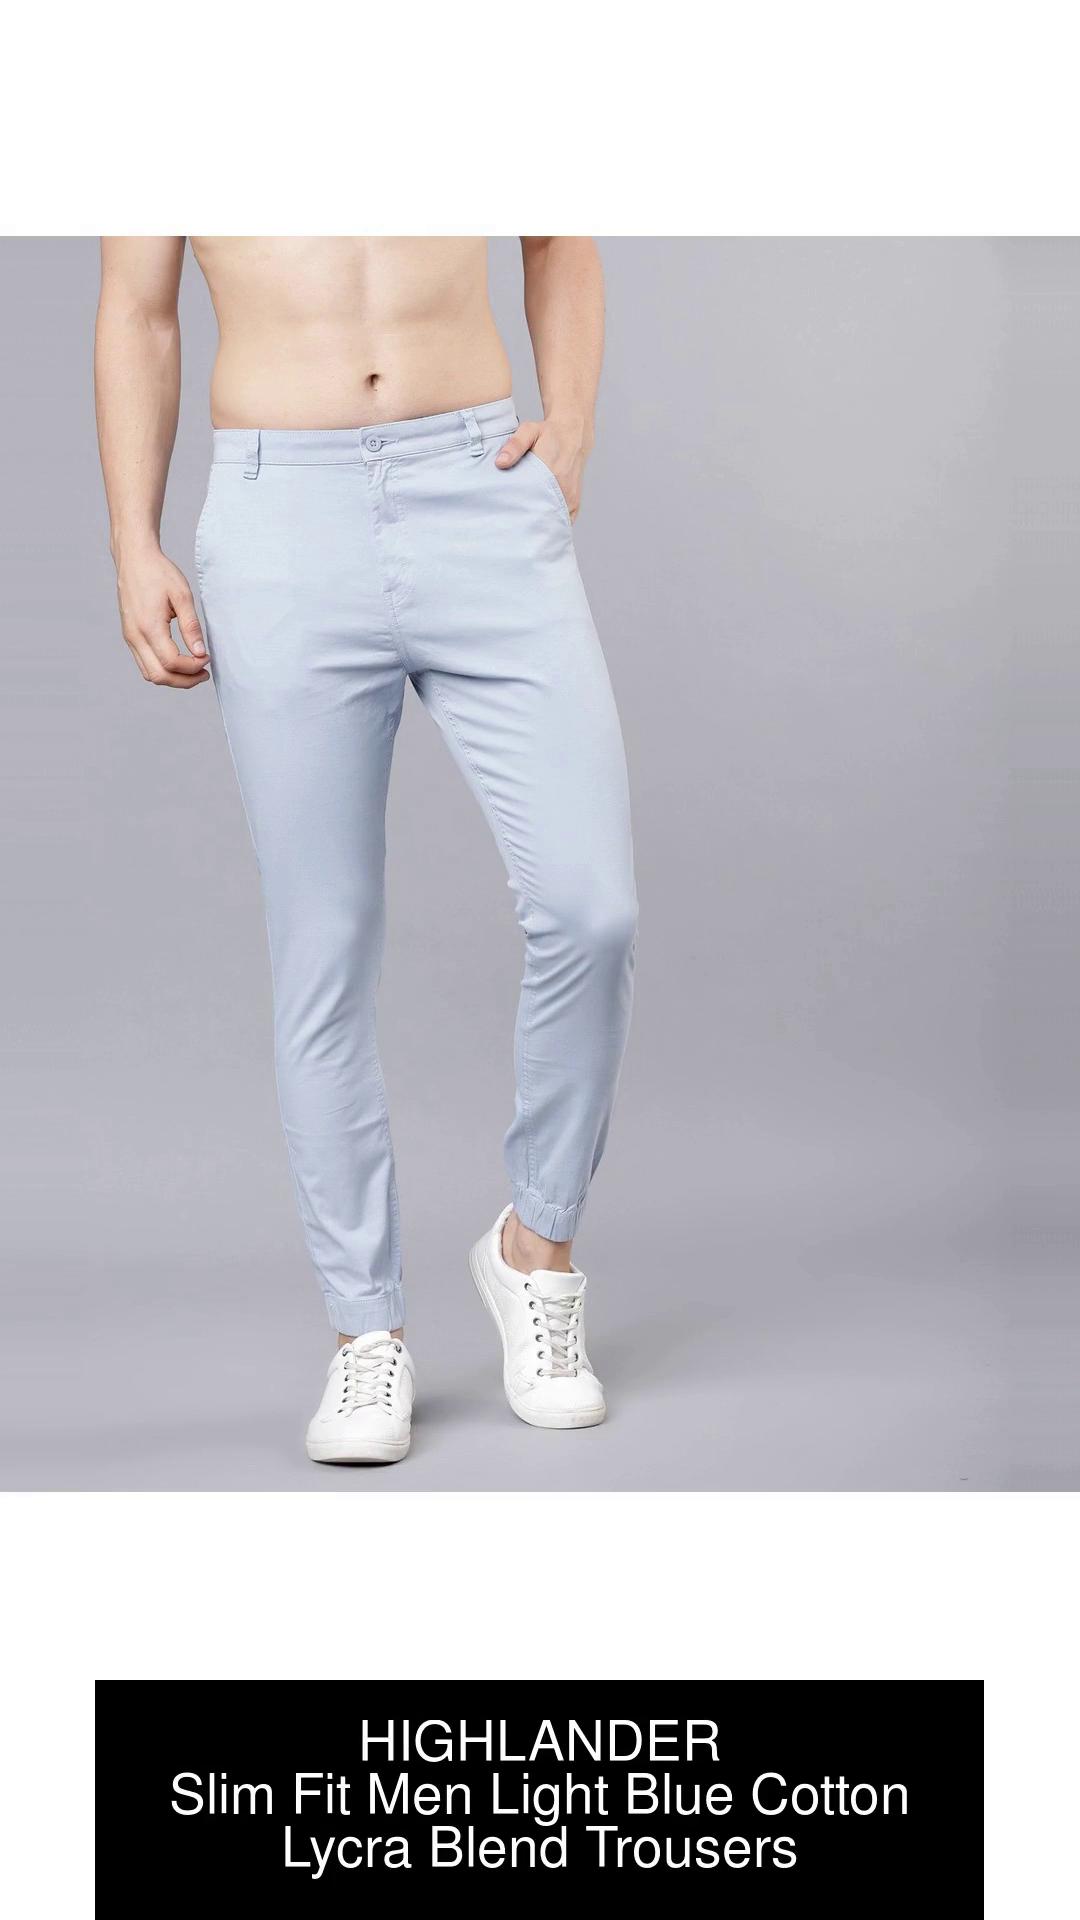 Buy Cotton Ankle Length Straight Fit Trouser Pants for WomenGirls Many  Colours are availbel Colour Light Blue at Amazonin